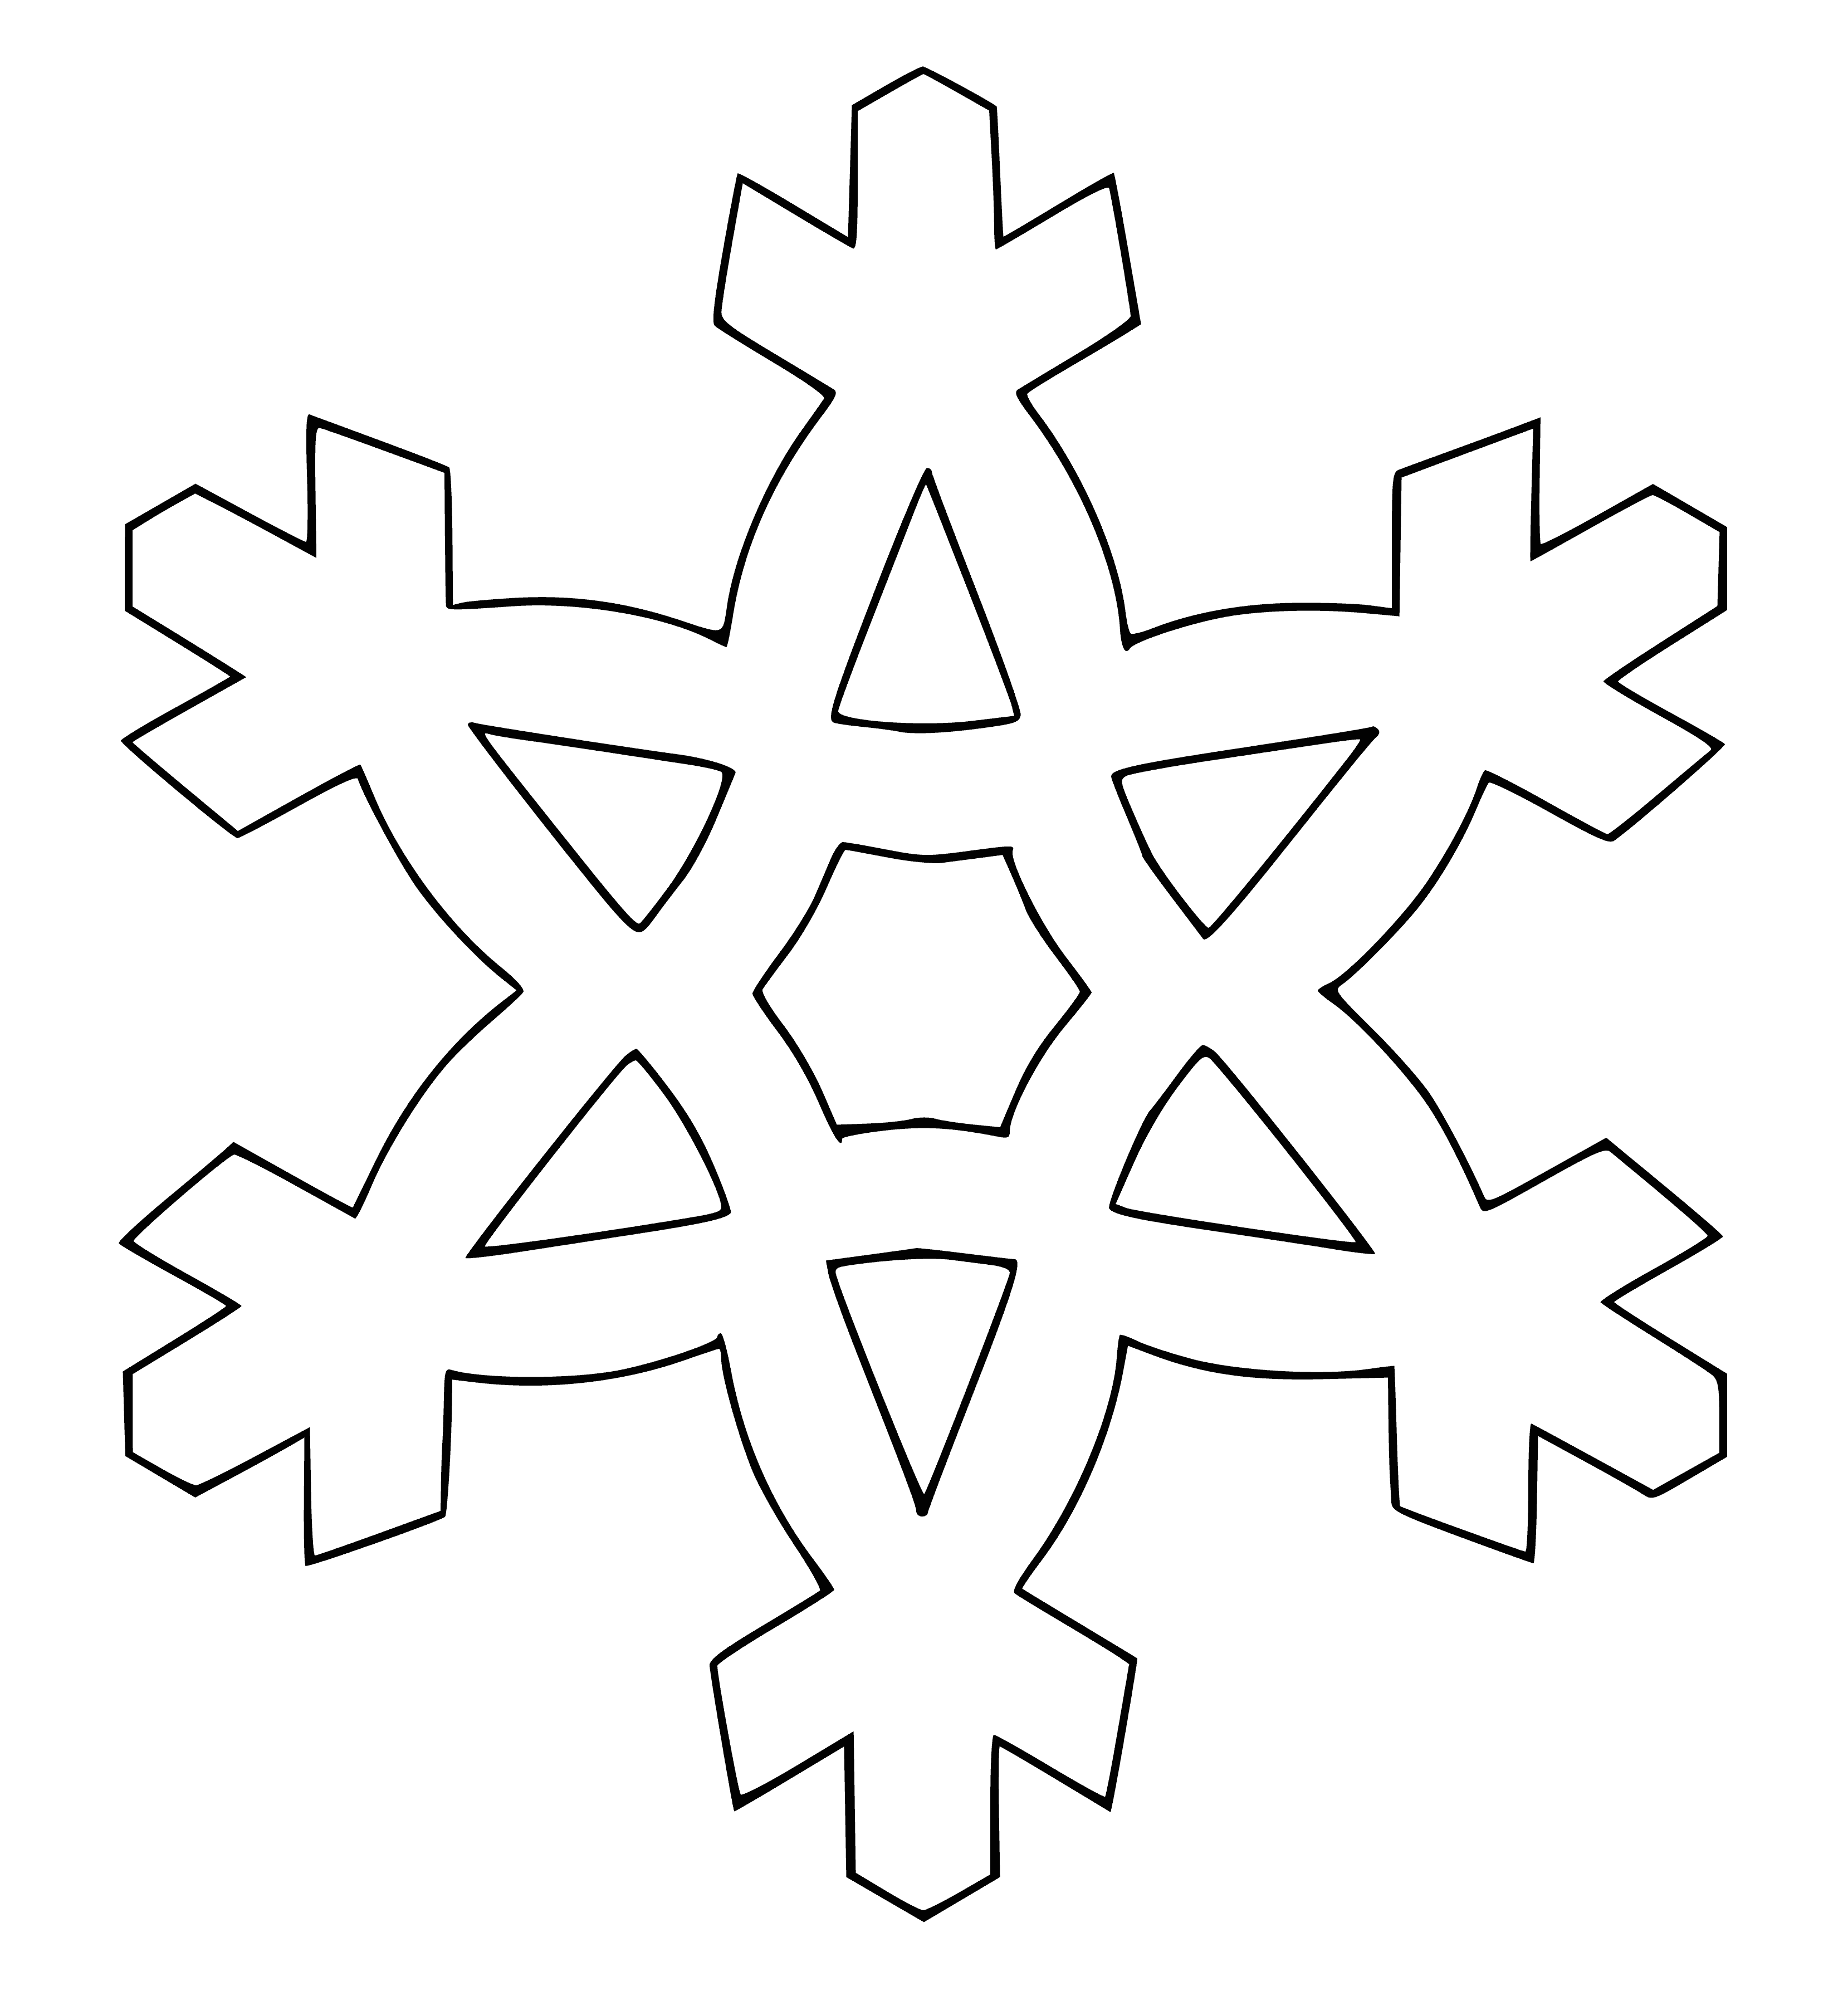 coloring page: 3 snowflakes in coloring page: white, 6 sides, falling from top.